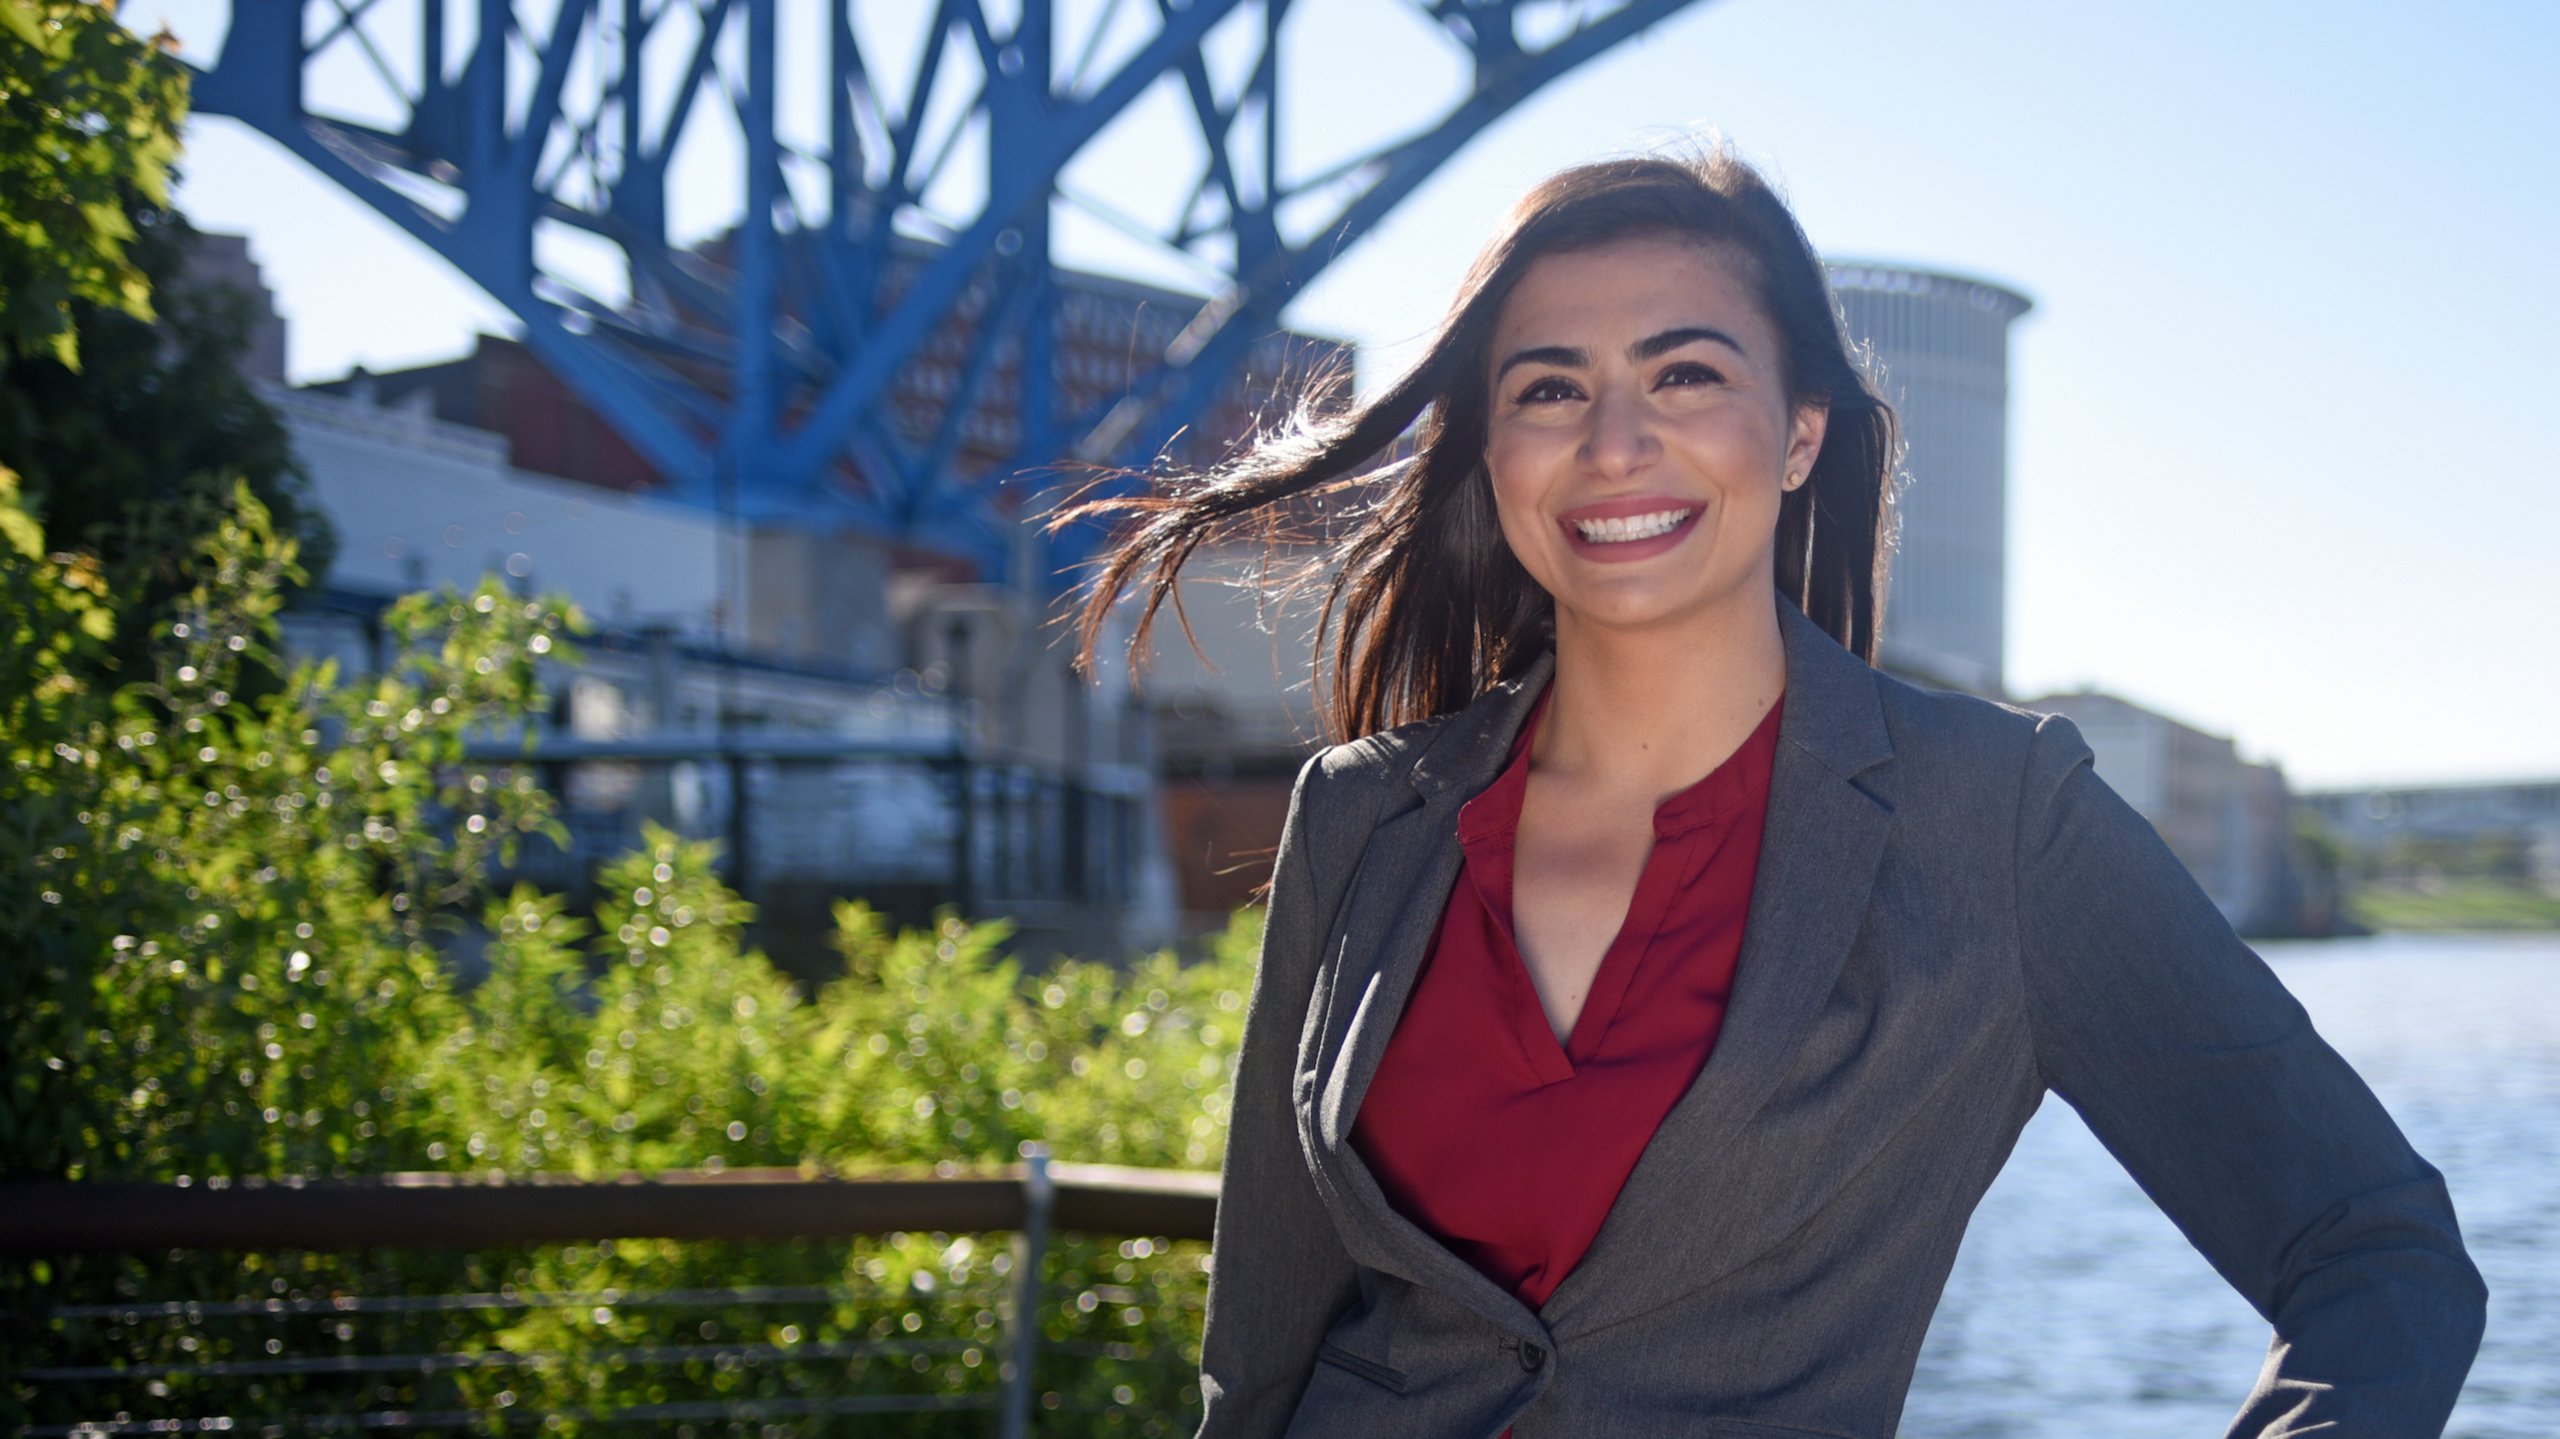 Allie Schwertner, sustainability technology and strategy leader at Rockwell Automation, poses on the bank of the Cuyahoga River in Cleveland.